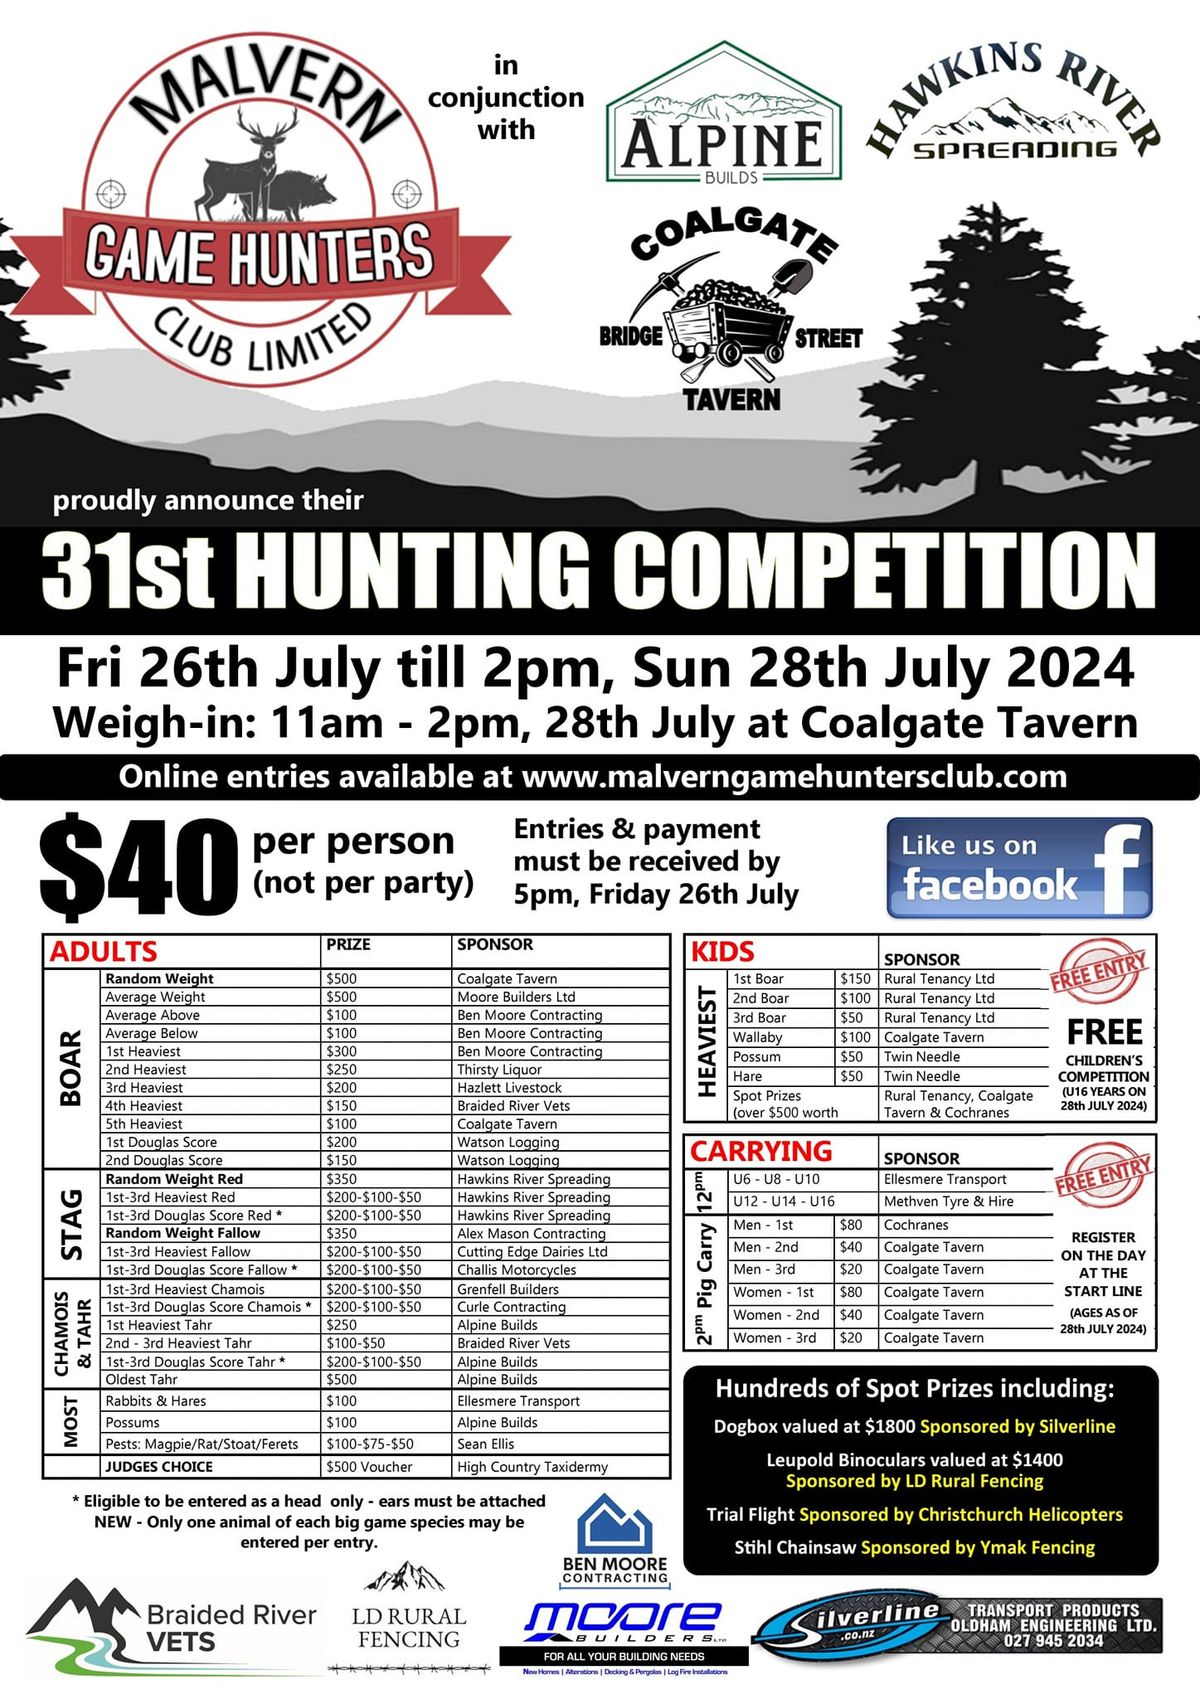 Malvern Game Hunters 2024 Hunting Competition